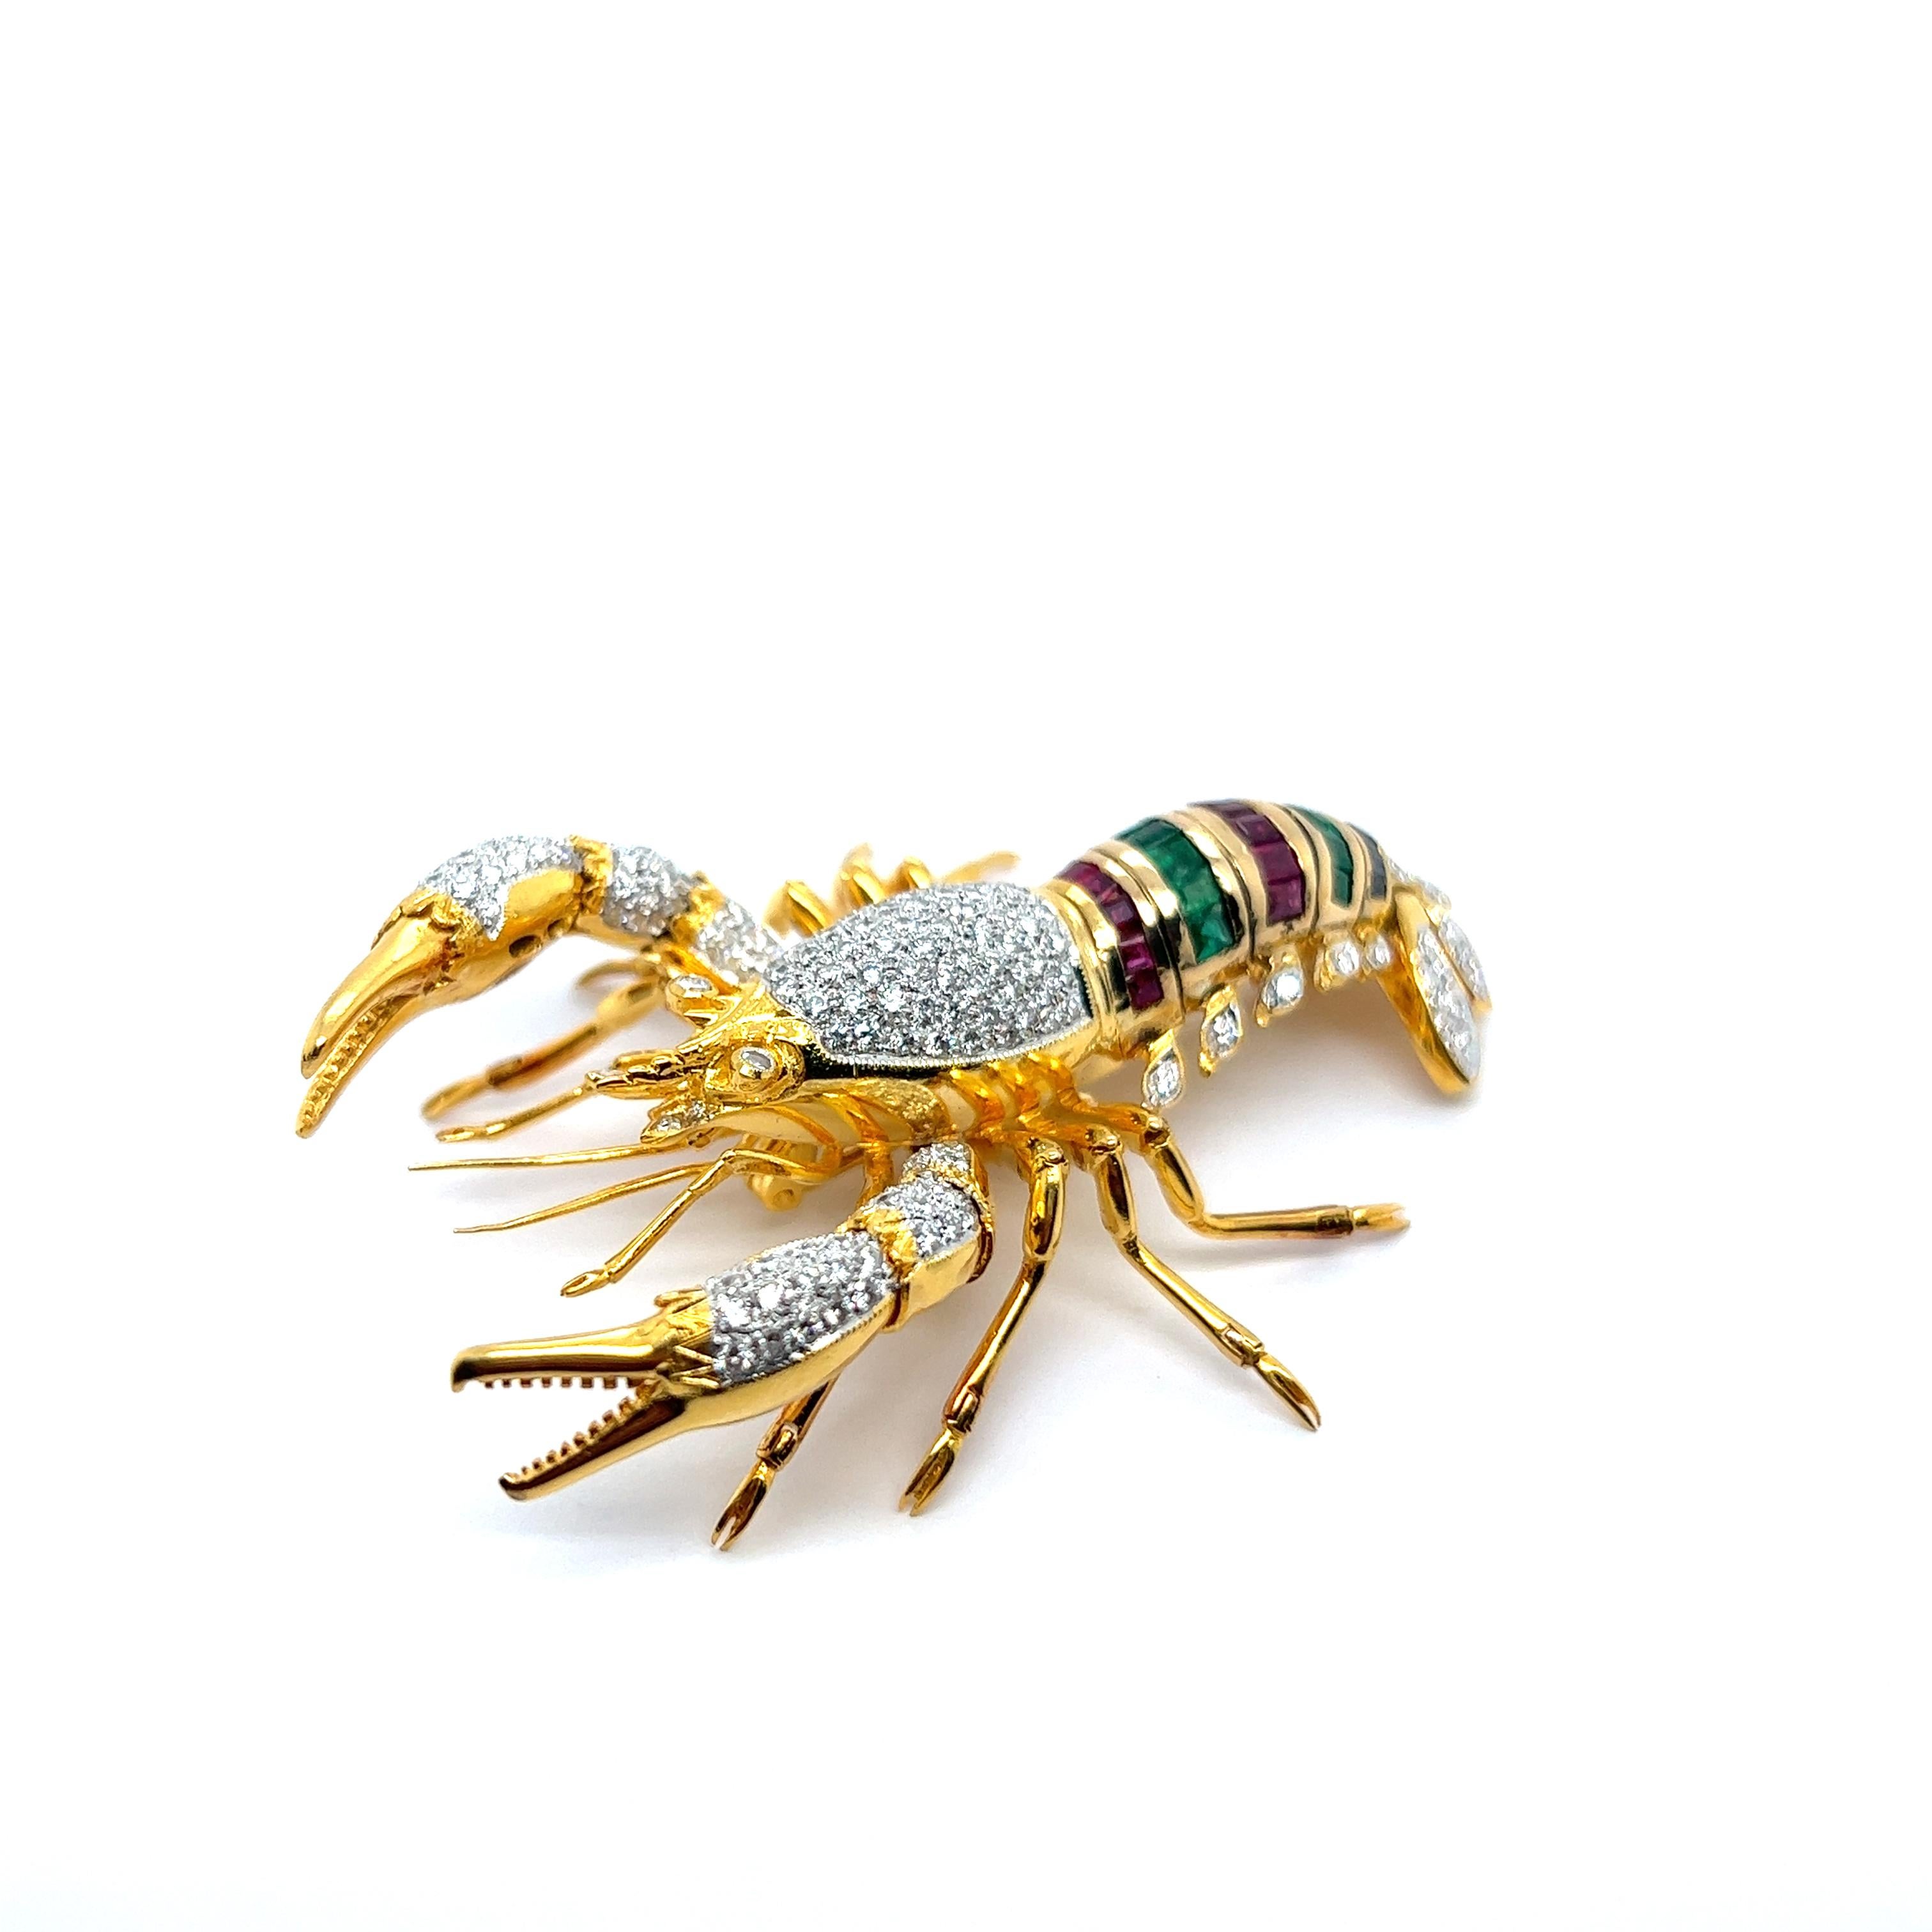 Lobster Brooch with Diamonds Rubies Emeralds & Sapphires in 18 Karat Yellow Gold In Good Condition For Sale In Lucerne, CH